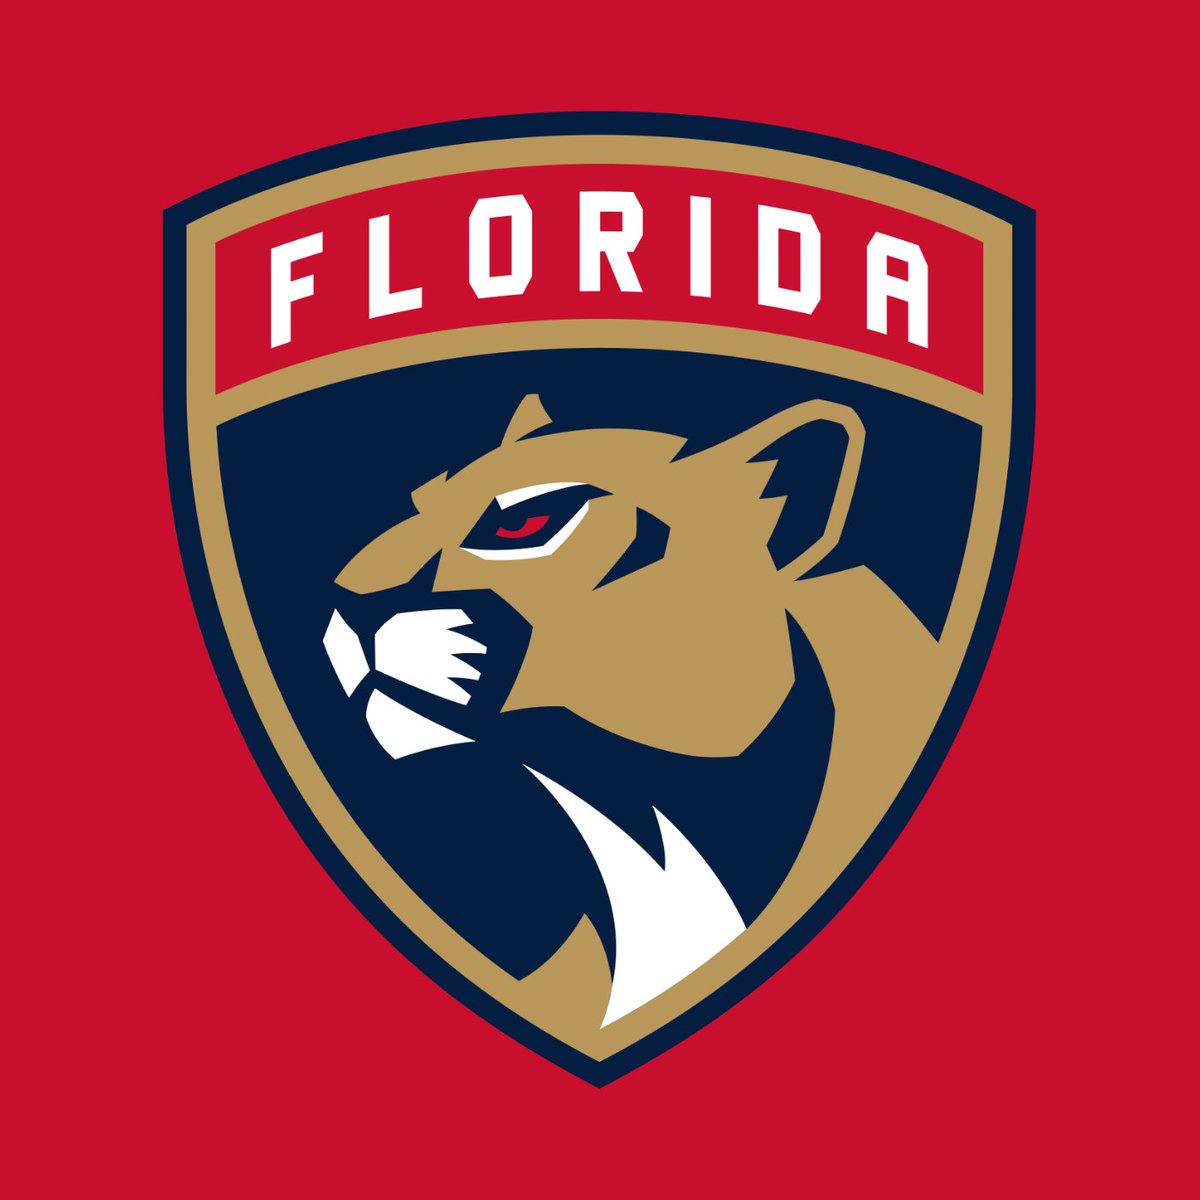 With the 63rd overall selection in the NHL Draft, the Florida Panthers are proud to select: Shaggy. https://t.co/pgHOKrxC4P